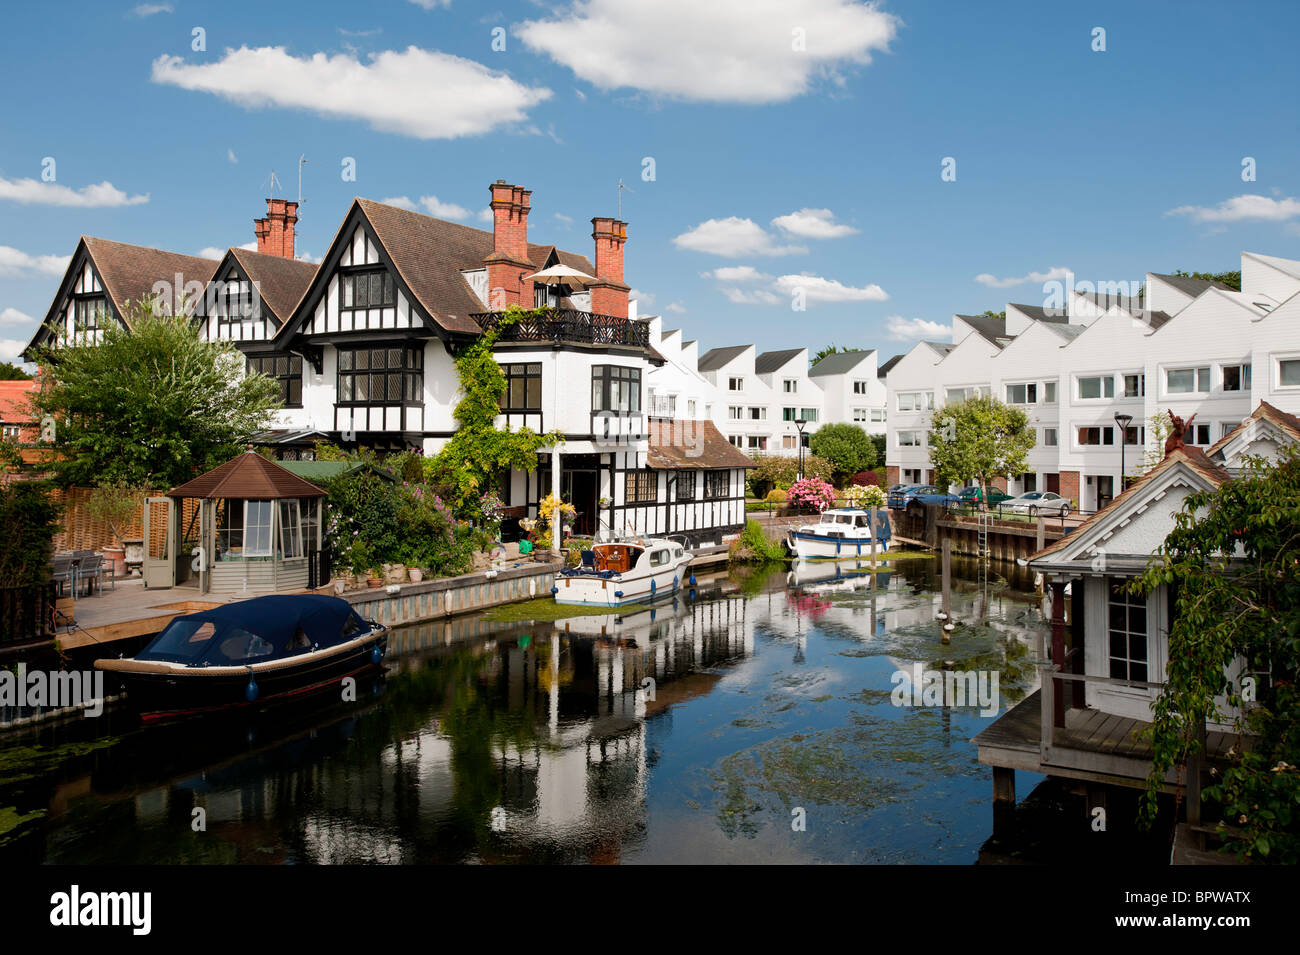 Property overlooking water, Marlow historic town situated on the River Thames, Buckinghamshire, England, United Kingdom Stock Photo